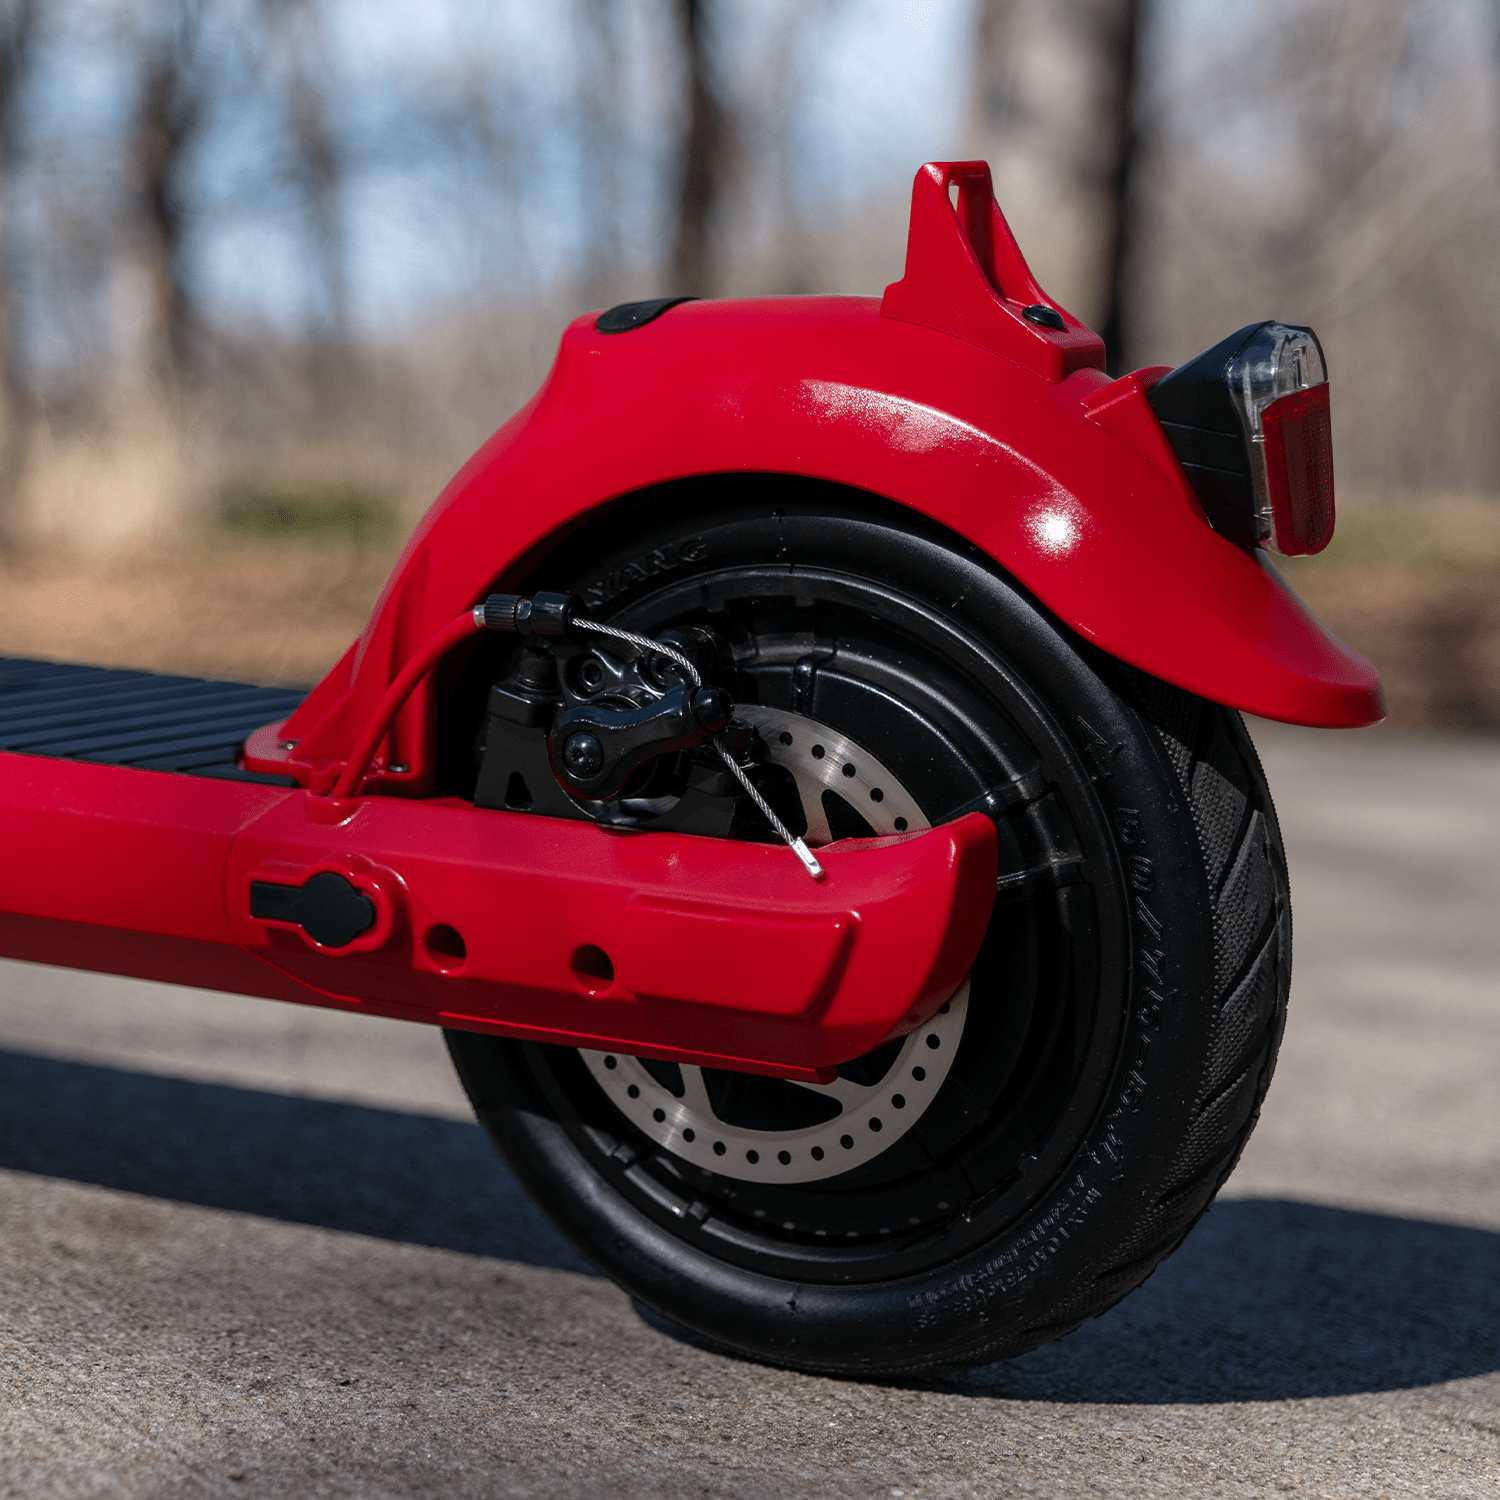 Apex Electric Scooter